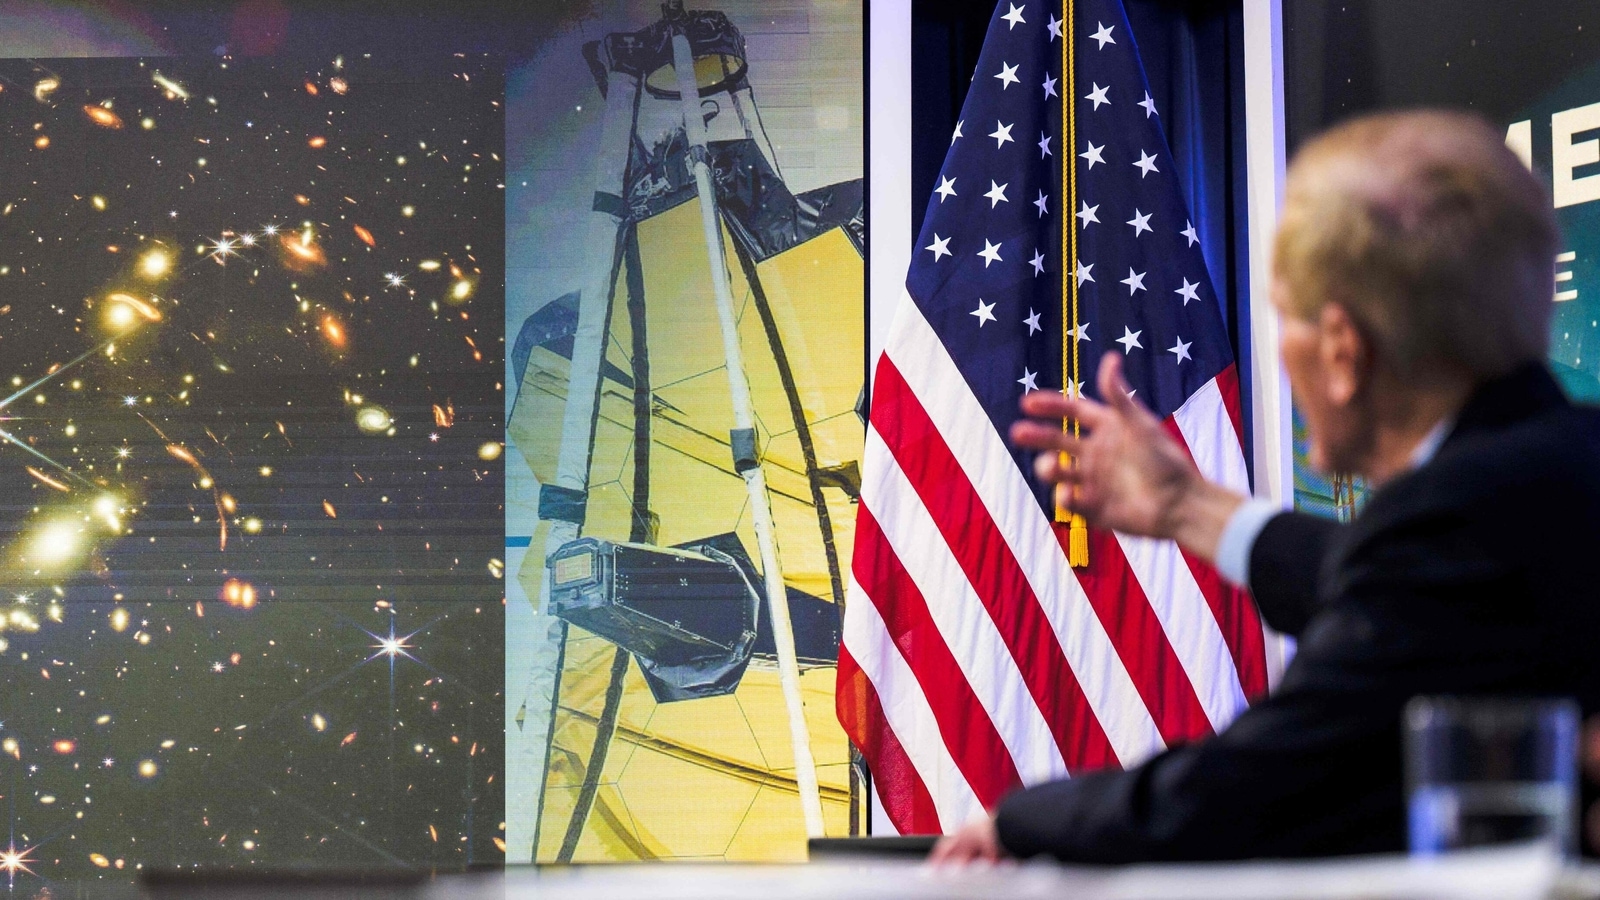 NASA to showcase Webb space telescope's first full-color images